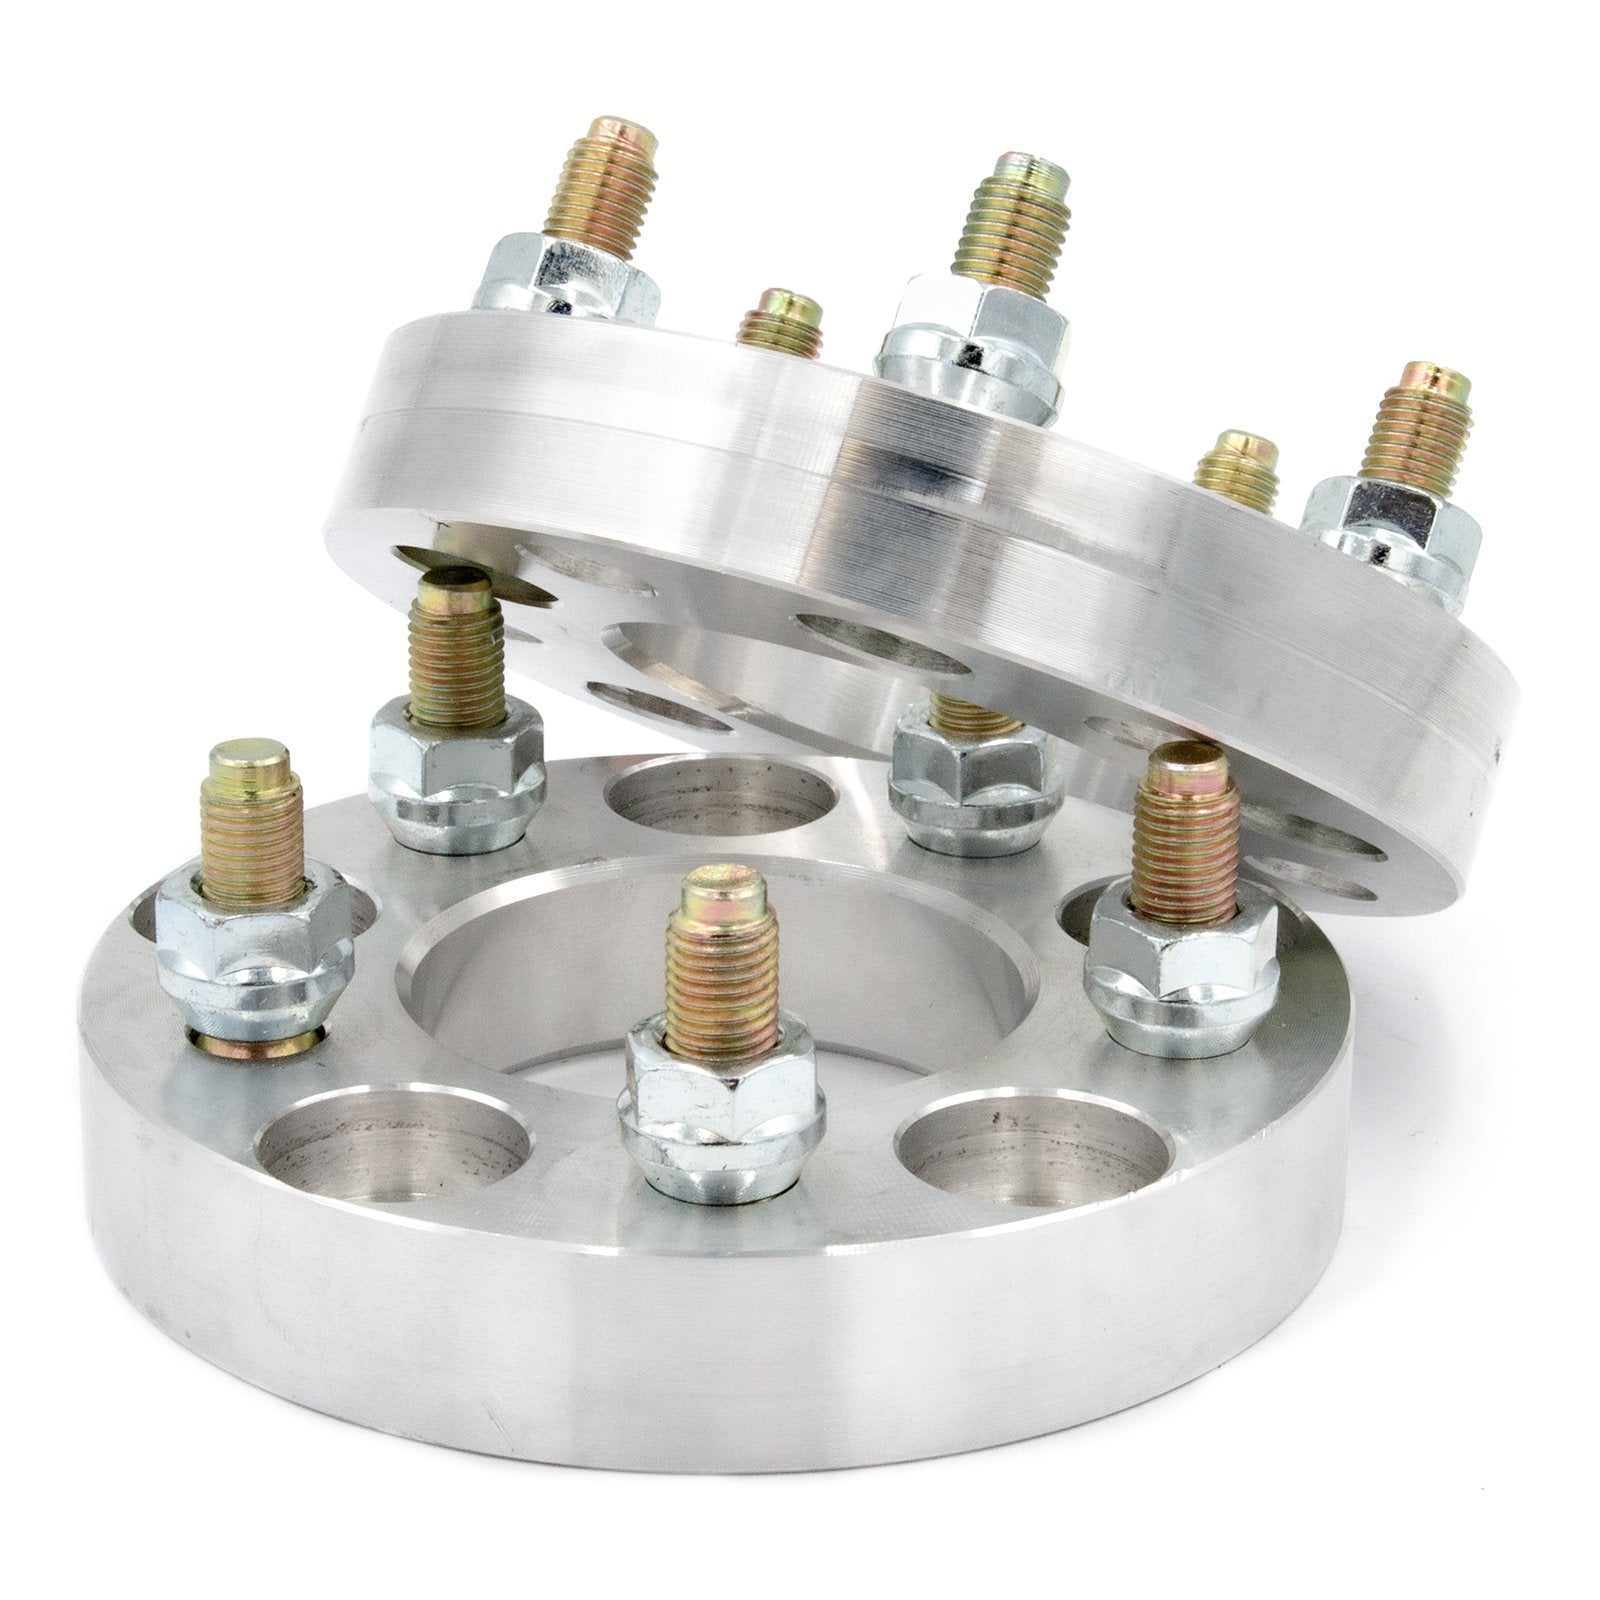 High-Quality, Durable Wheel Adapter 5x127 to 5x112 And Equipment